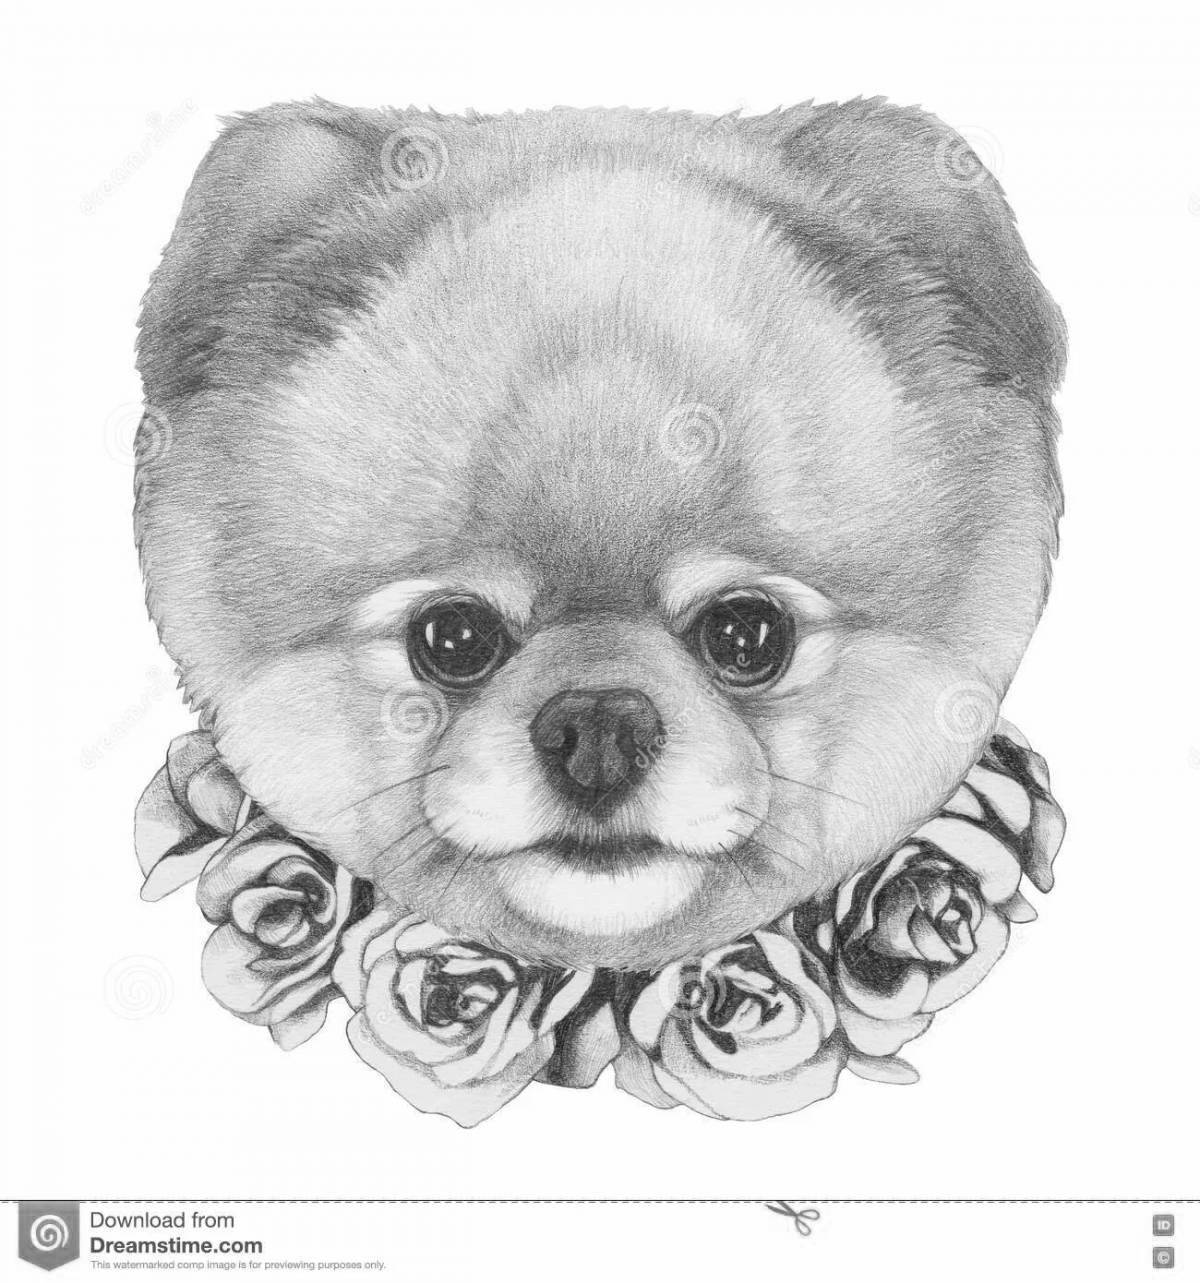 Great Spitz drawing